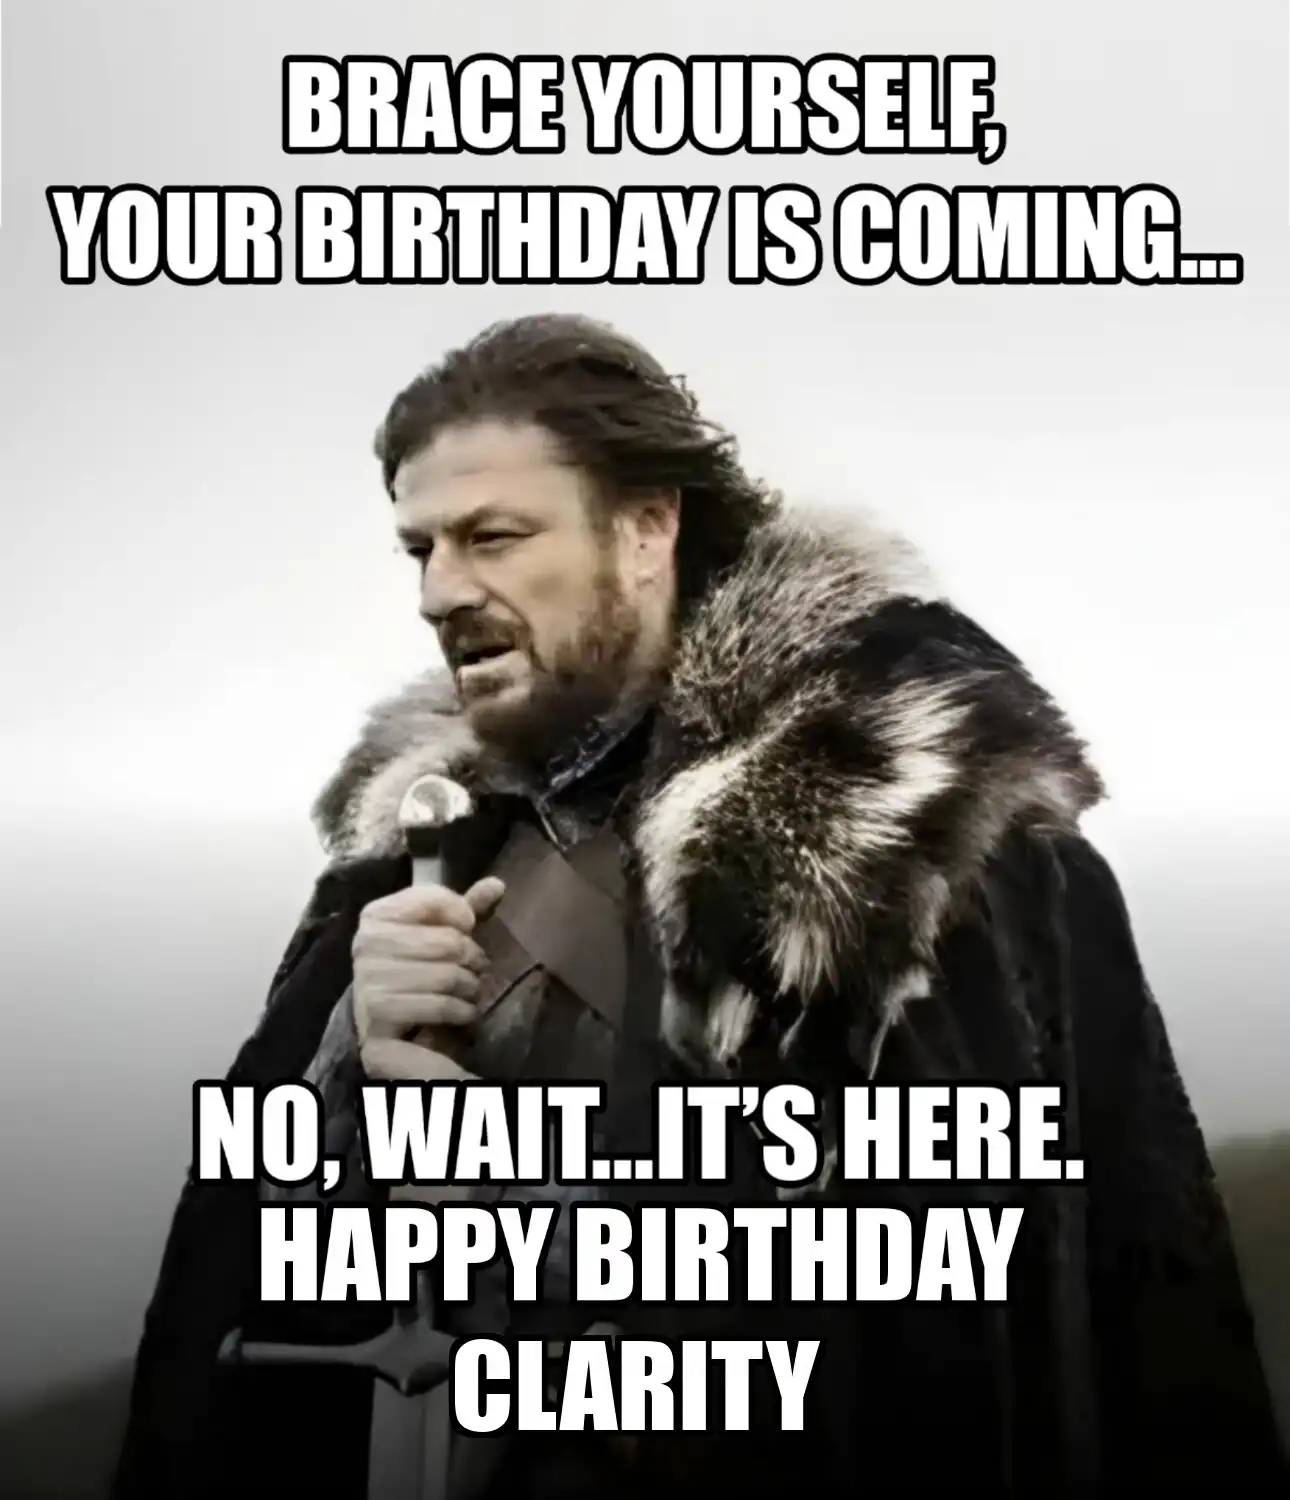 Happy Birthday Clarity Brace Yourself Your Birthday Is Coming Meme